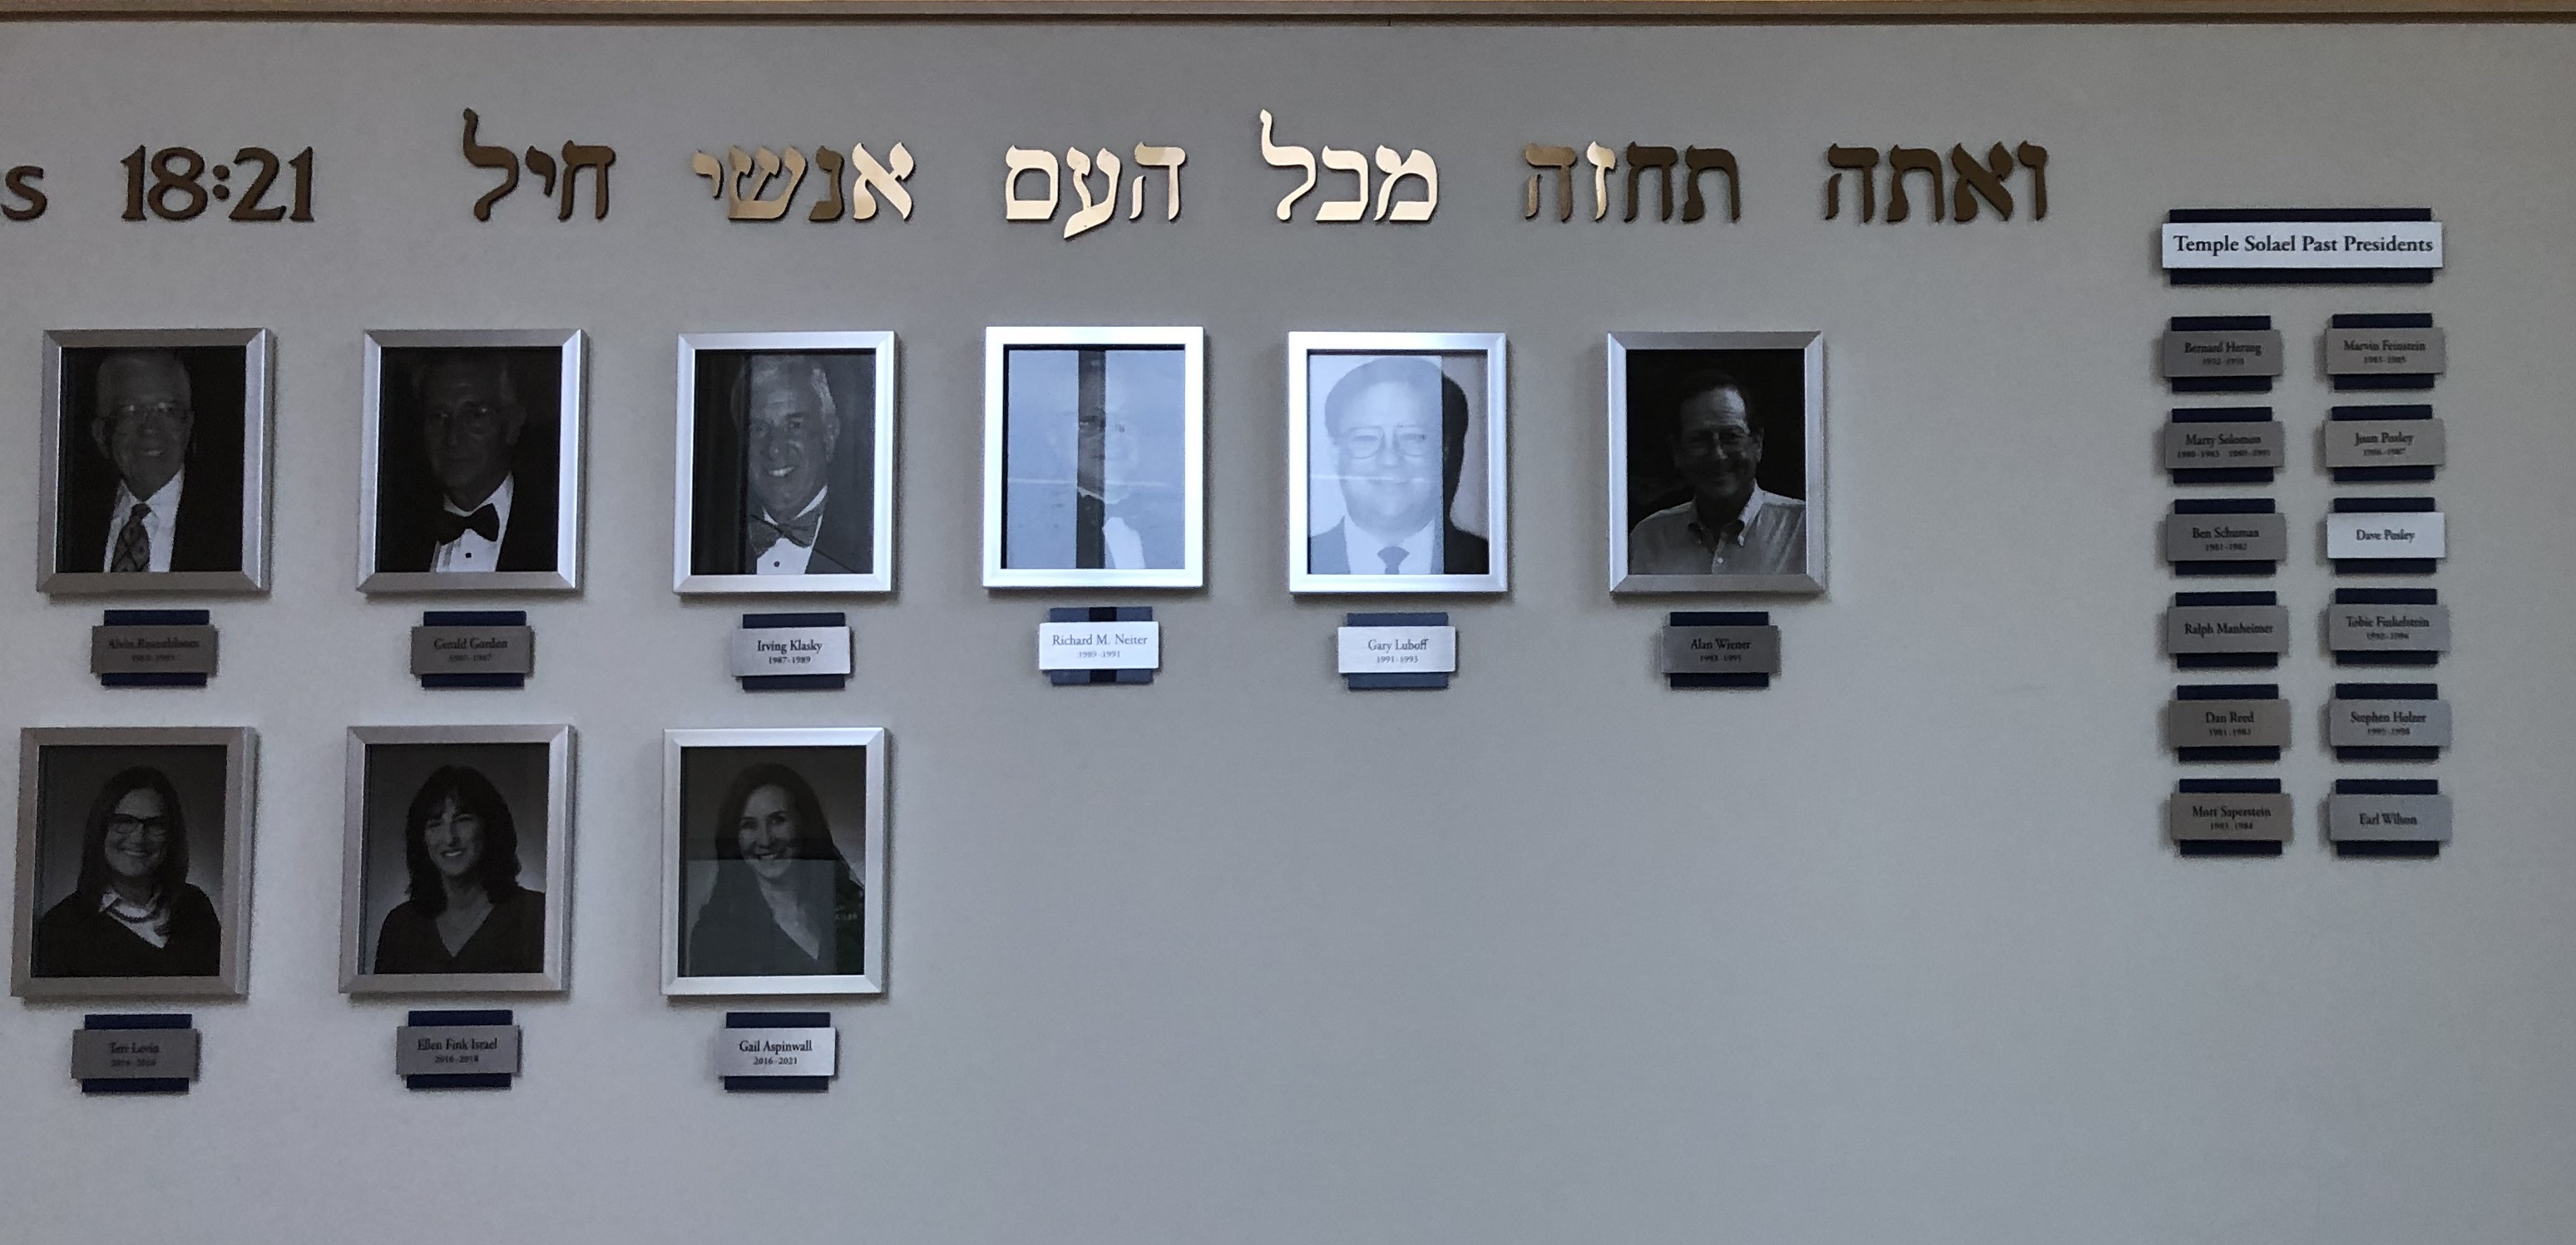 You are currently viewing Commemoration Wall for Temple Judea in Tarzana